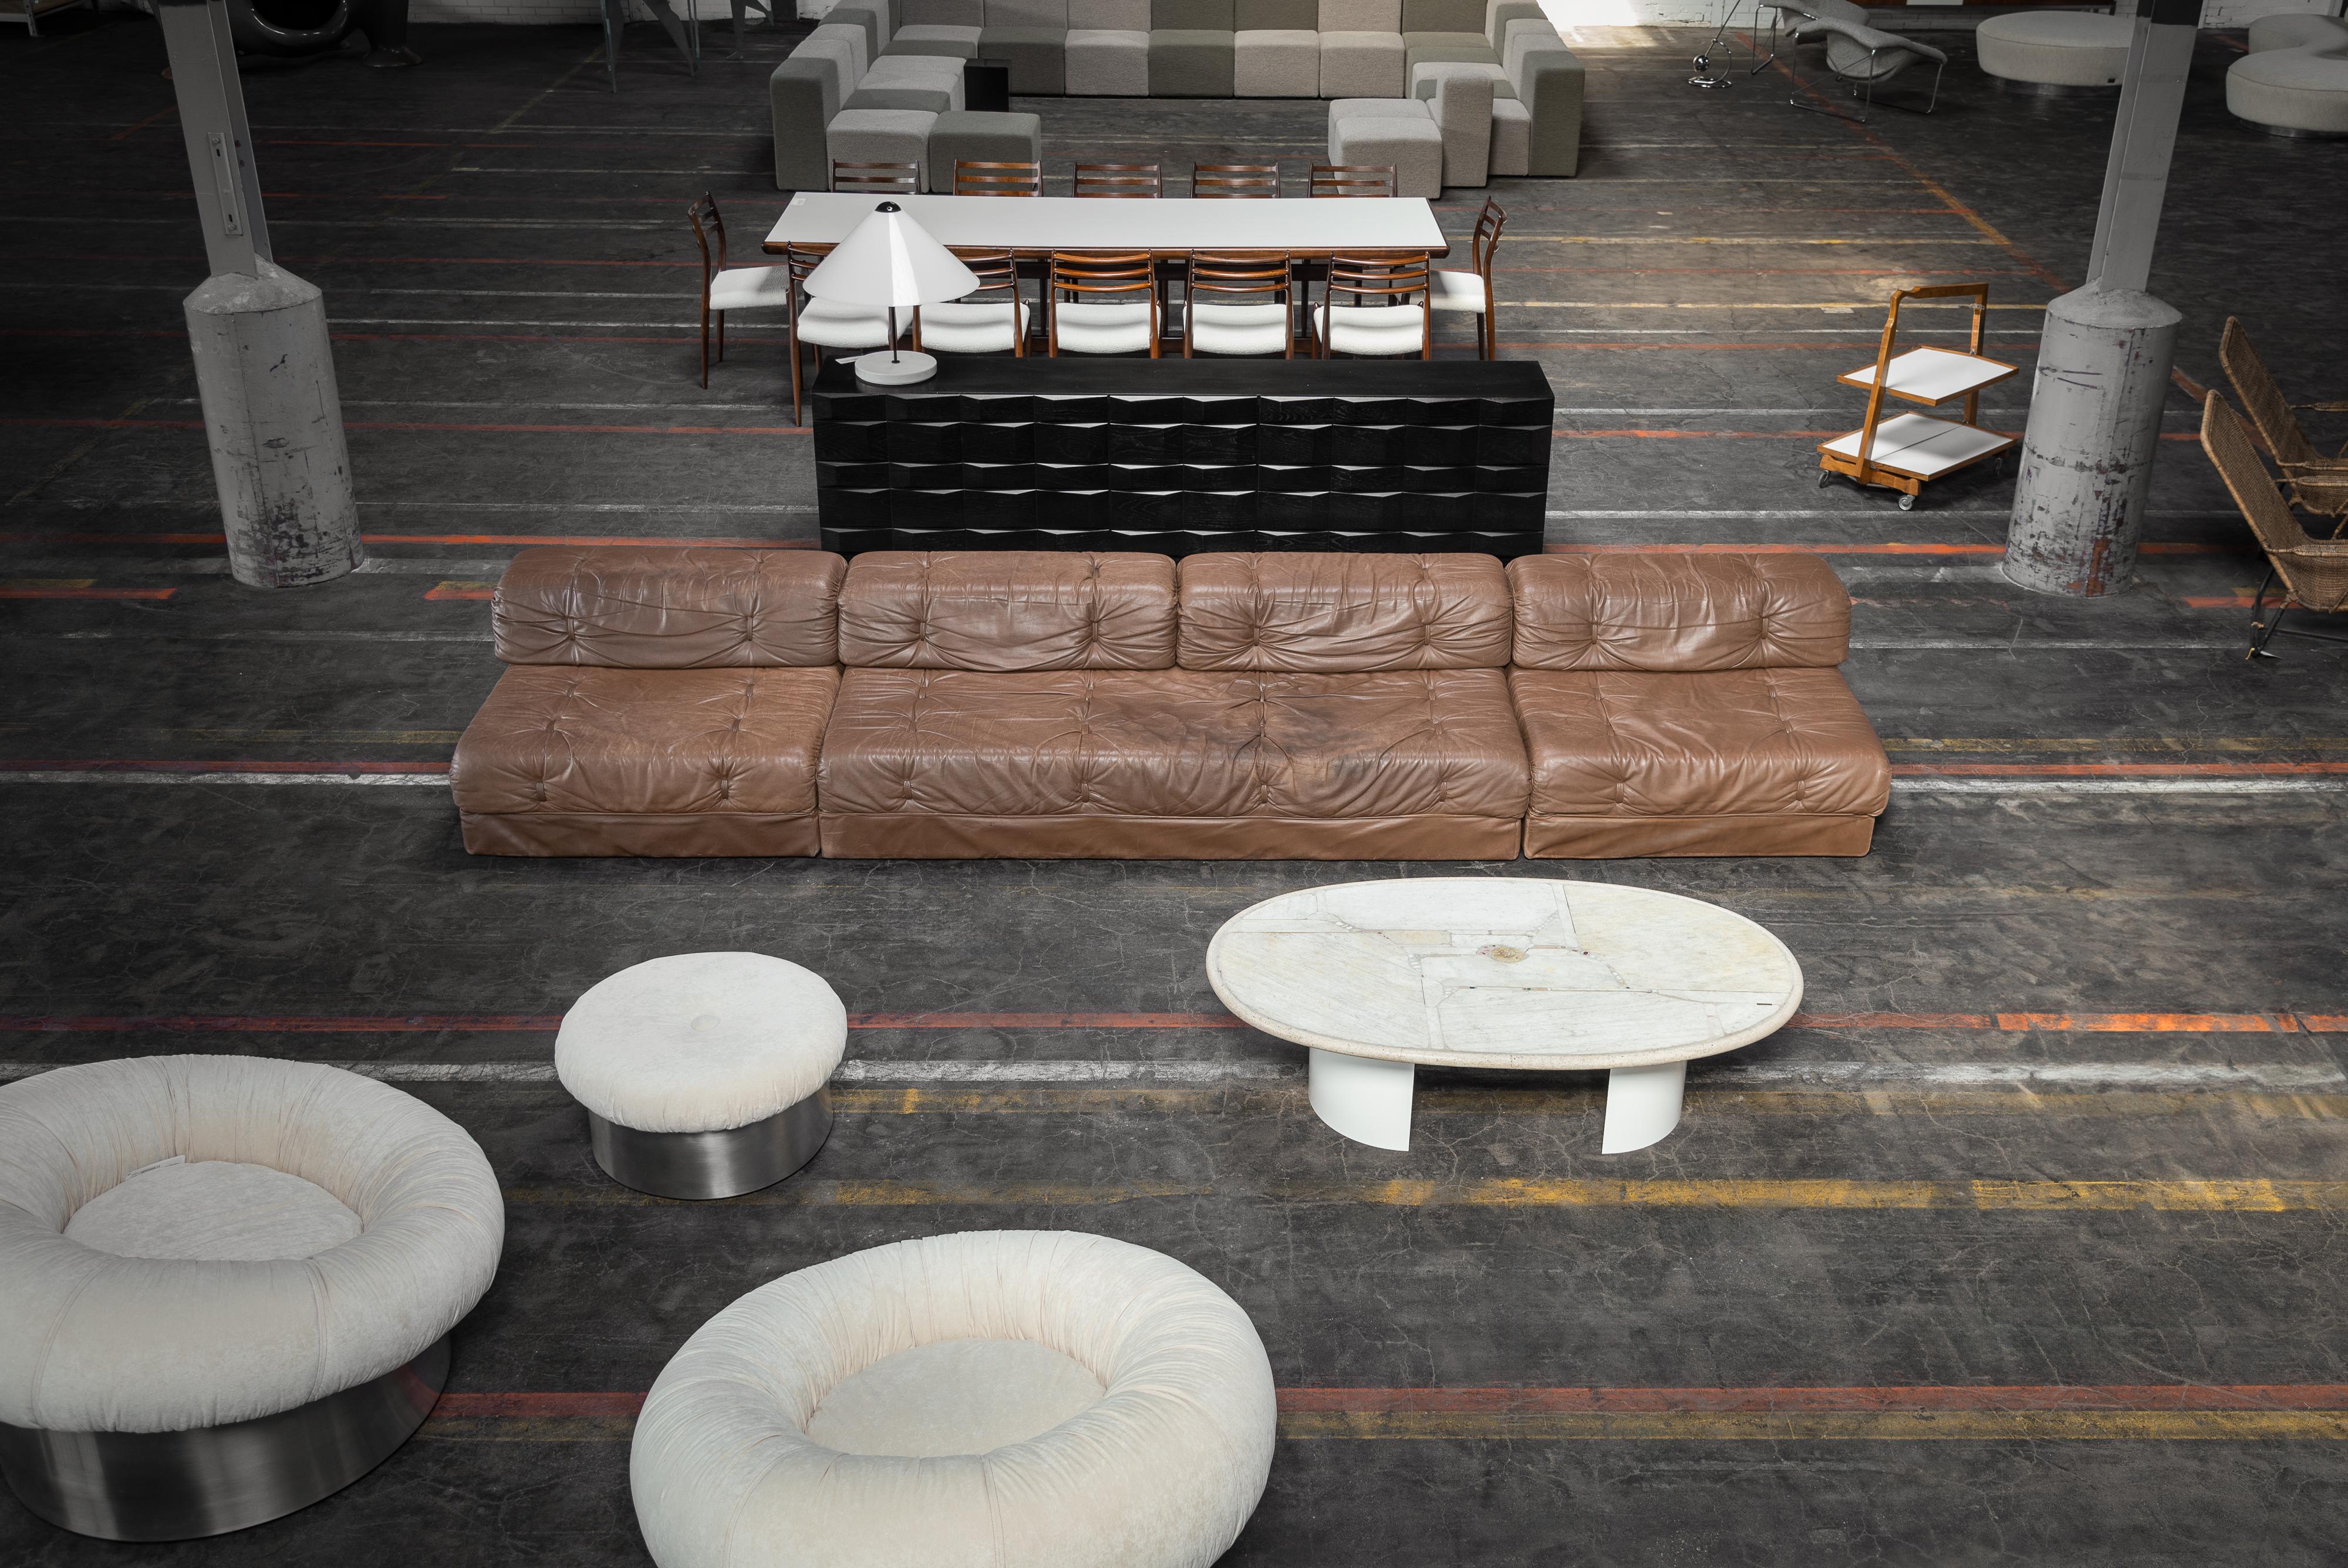 Super cool Wittmann Atrium modular leather sofa manufactured in Austria 1970. This sofa is made of dark brown leather and consists of a 2-seater and 2 single-seat pieces, forming a flexible modular system. It shares similarities with the DS88 sofa